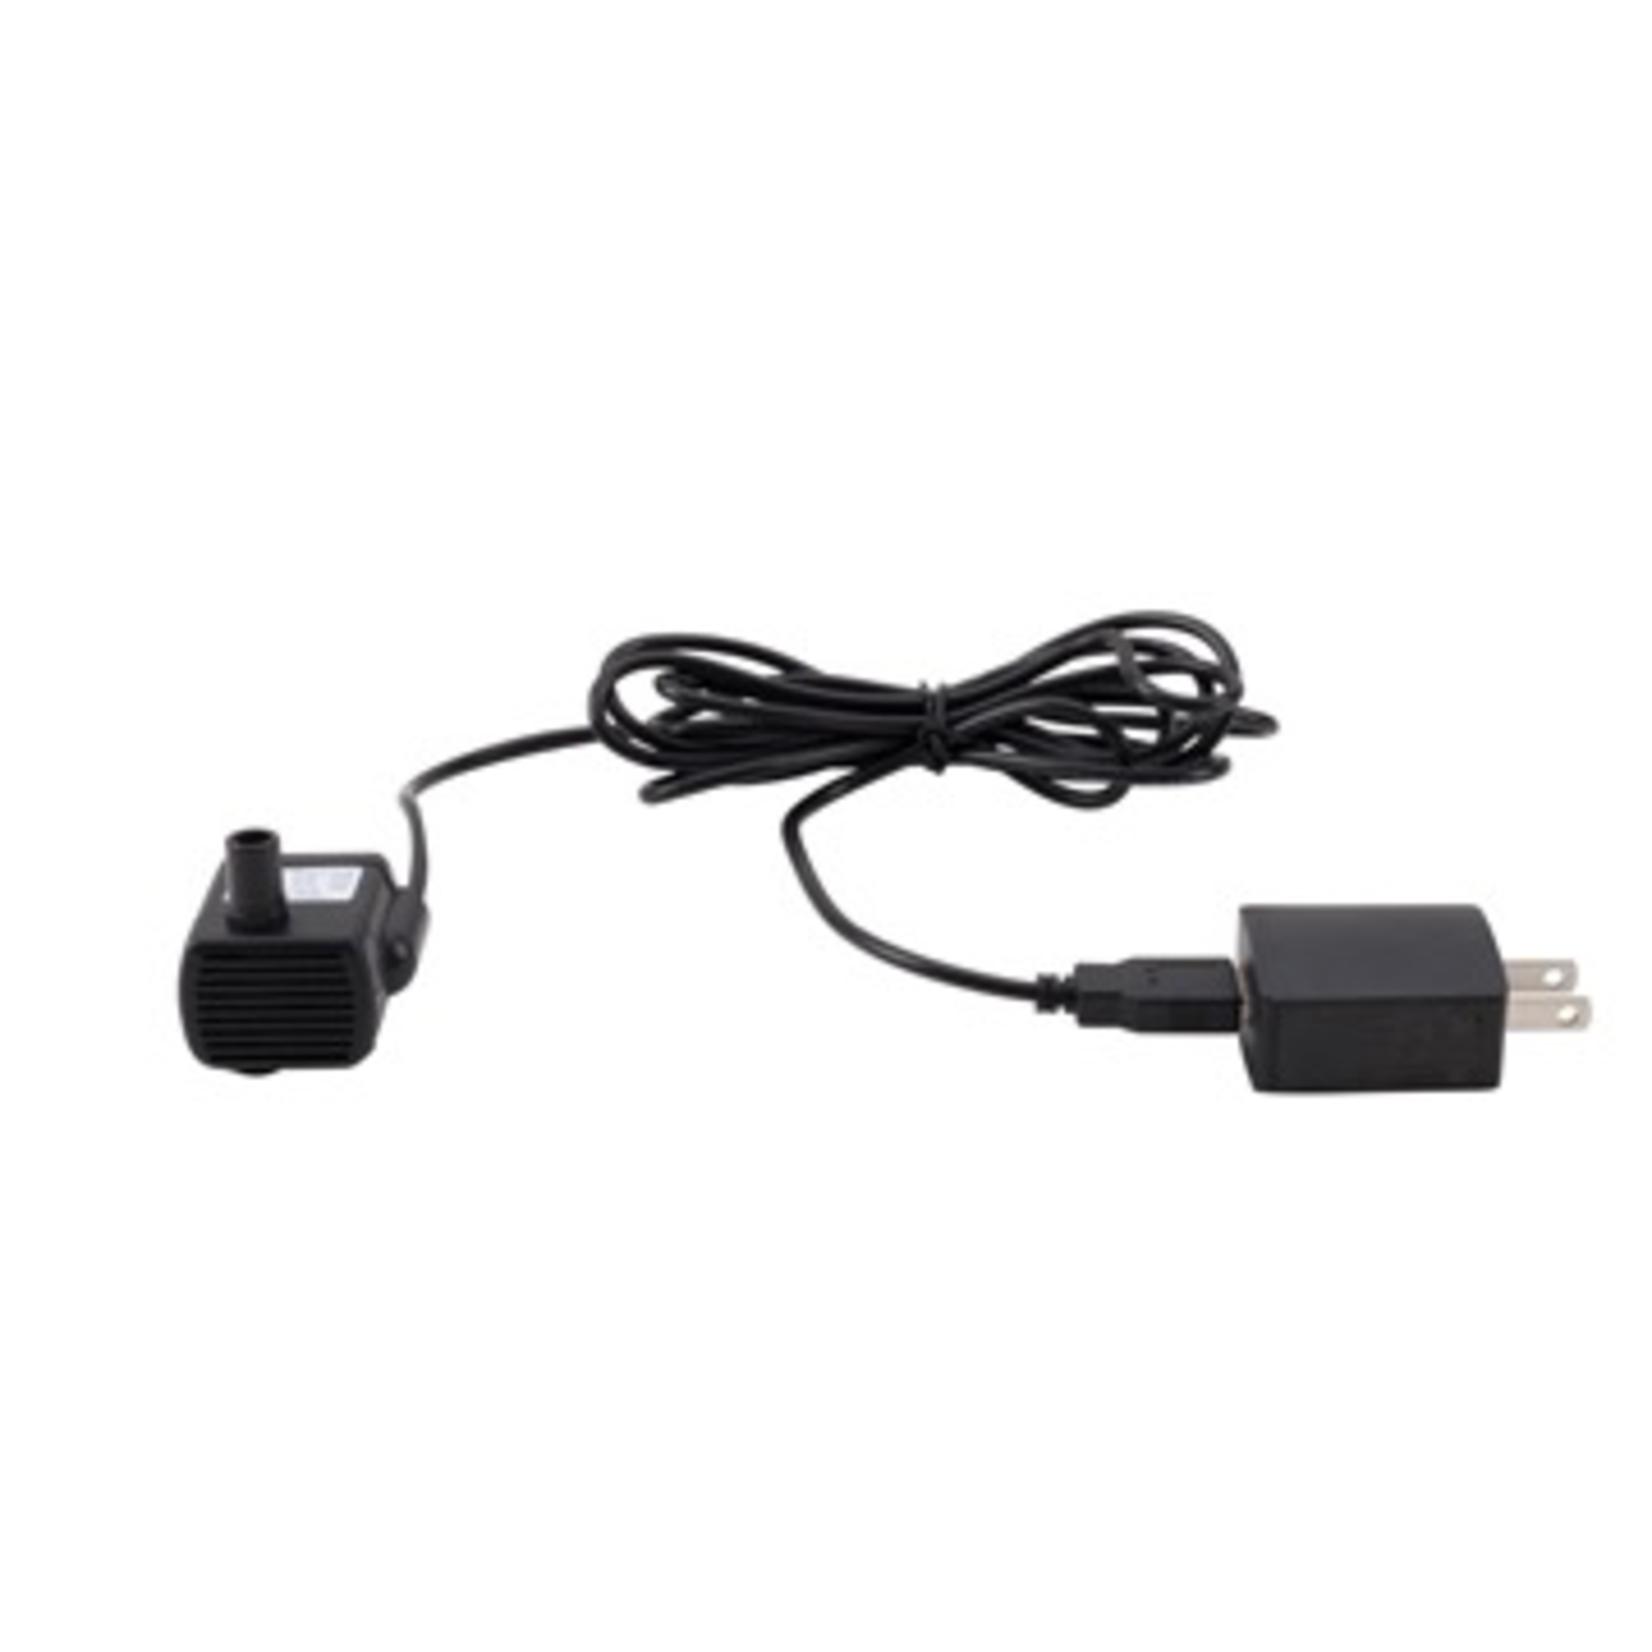 CAT IT (W) Replacement USB Pump with electrical cord and USB adapter for Cat & Dog Drinking Fountains